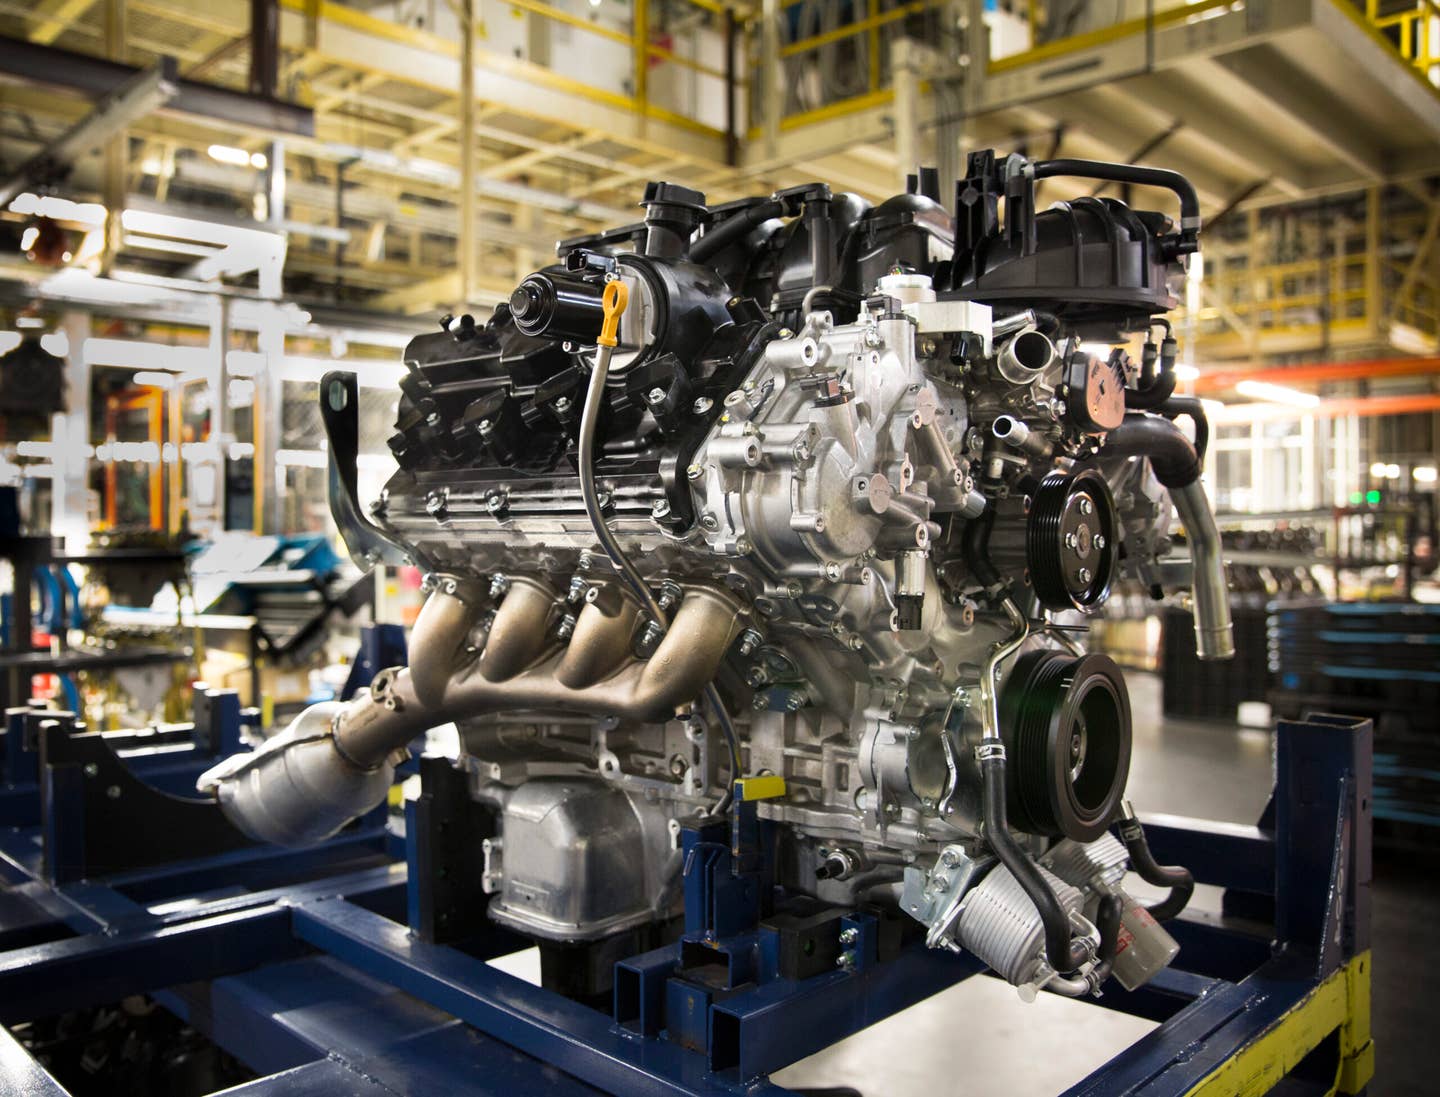 NASHVILLE, Tenn. (Dec. 15, 2015) – Nissan announced today that a new 5.6-liter Endurance® V8 gasoline engine, assembled in Decherd, Tennessee, will be available in the all-new TITAN and TITAN XD full-size pickup trucks, completing the first phase of the “American TITAN” story. The engine features four-valves per cylinder, Variable Valve Event &amp; Lift and Direct Injection, and is rated at 390 horsepower @ 5,800 rpm and 401 lb-ft of torque @ 4,000 rpm.